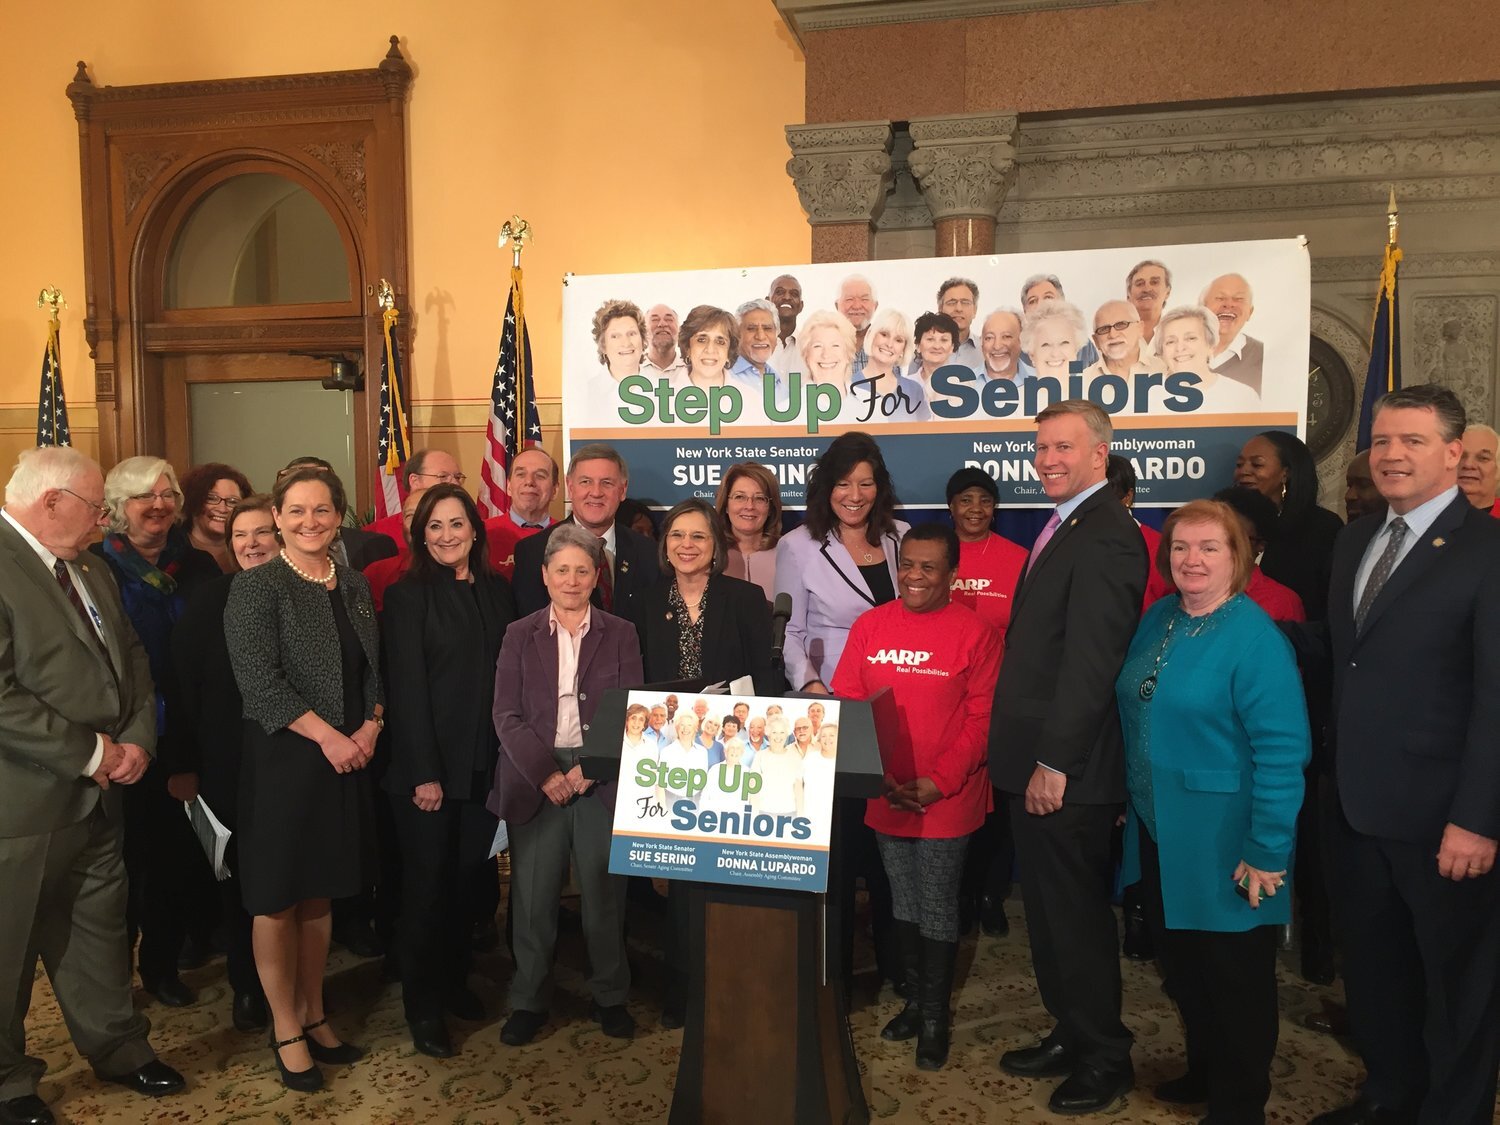 LiveOn NY Joins Senate and Assembly Members to Call on the State to "Step Up for Seniors"